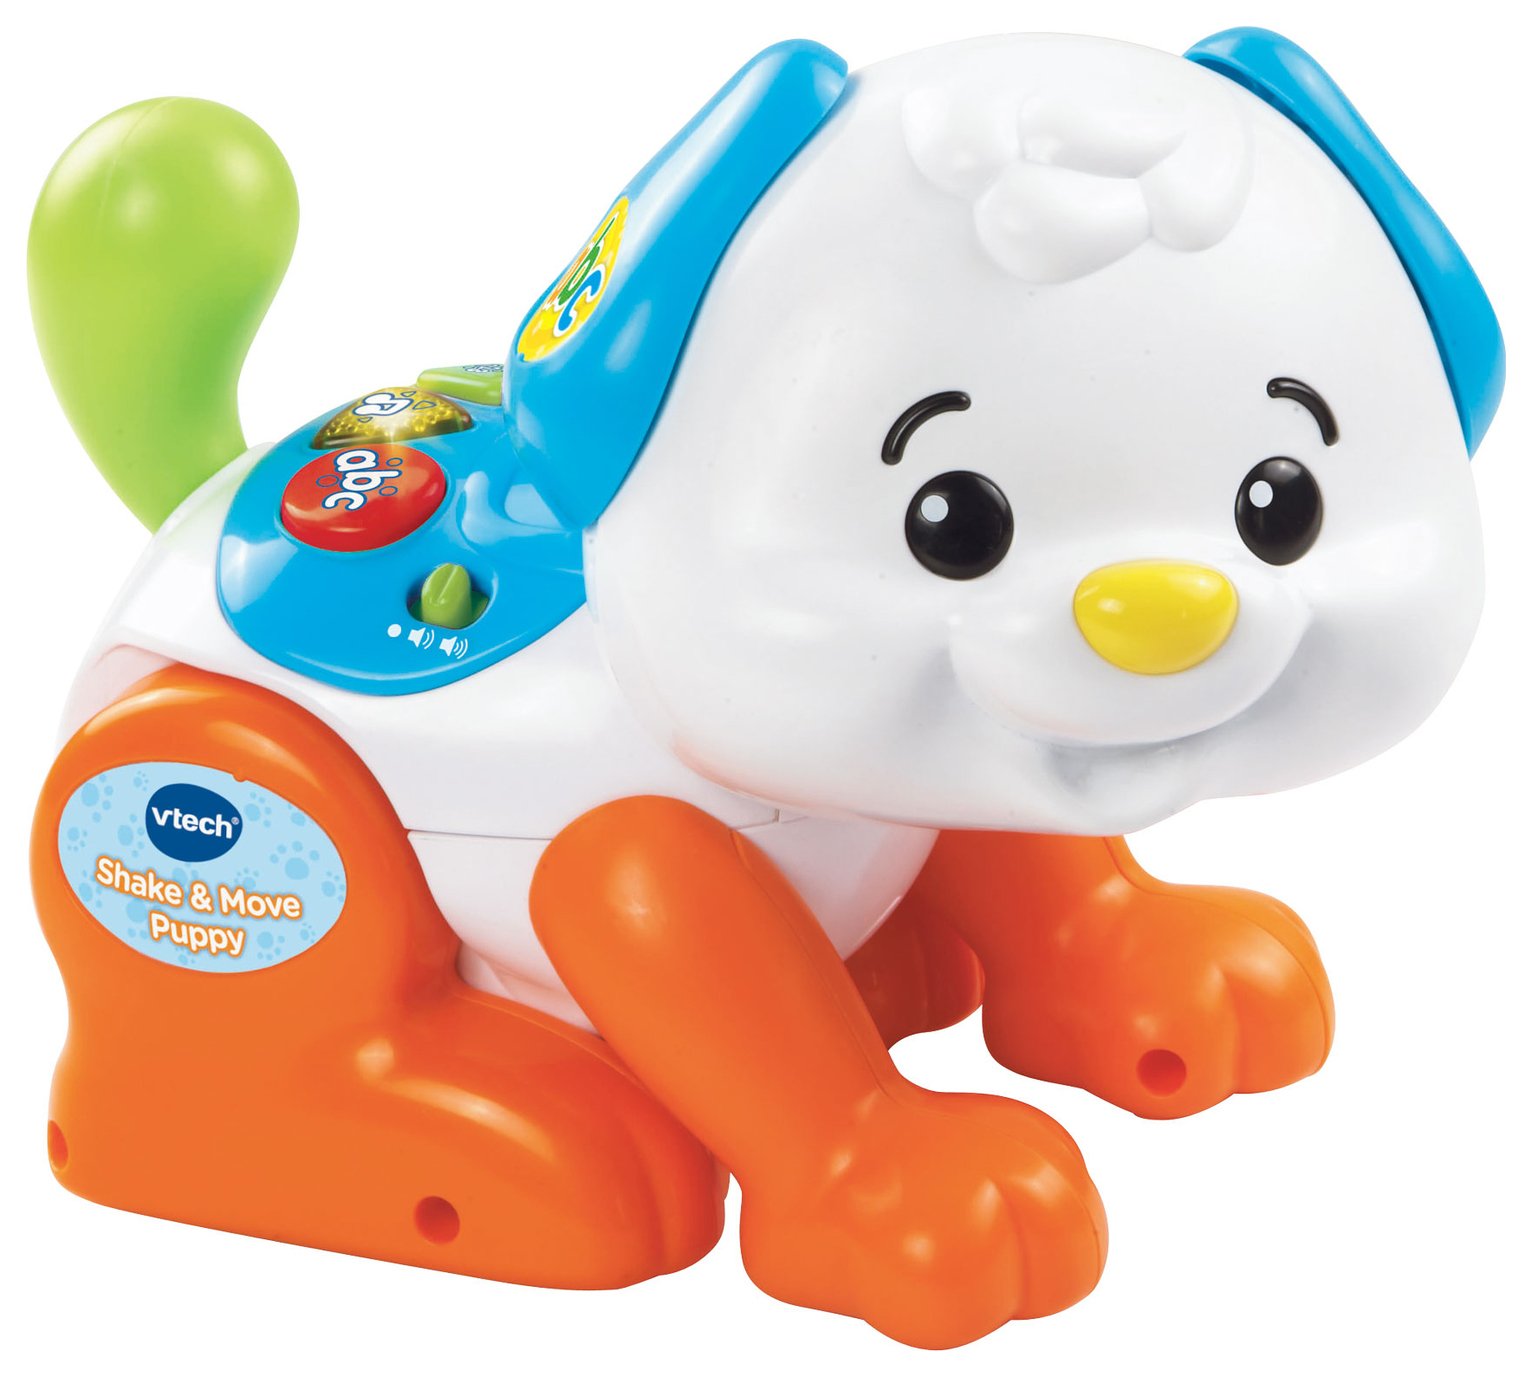 VTech Shake And Move Puppy